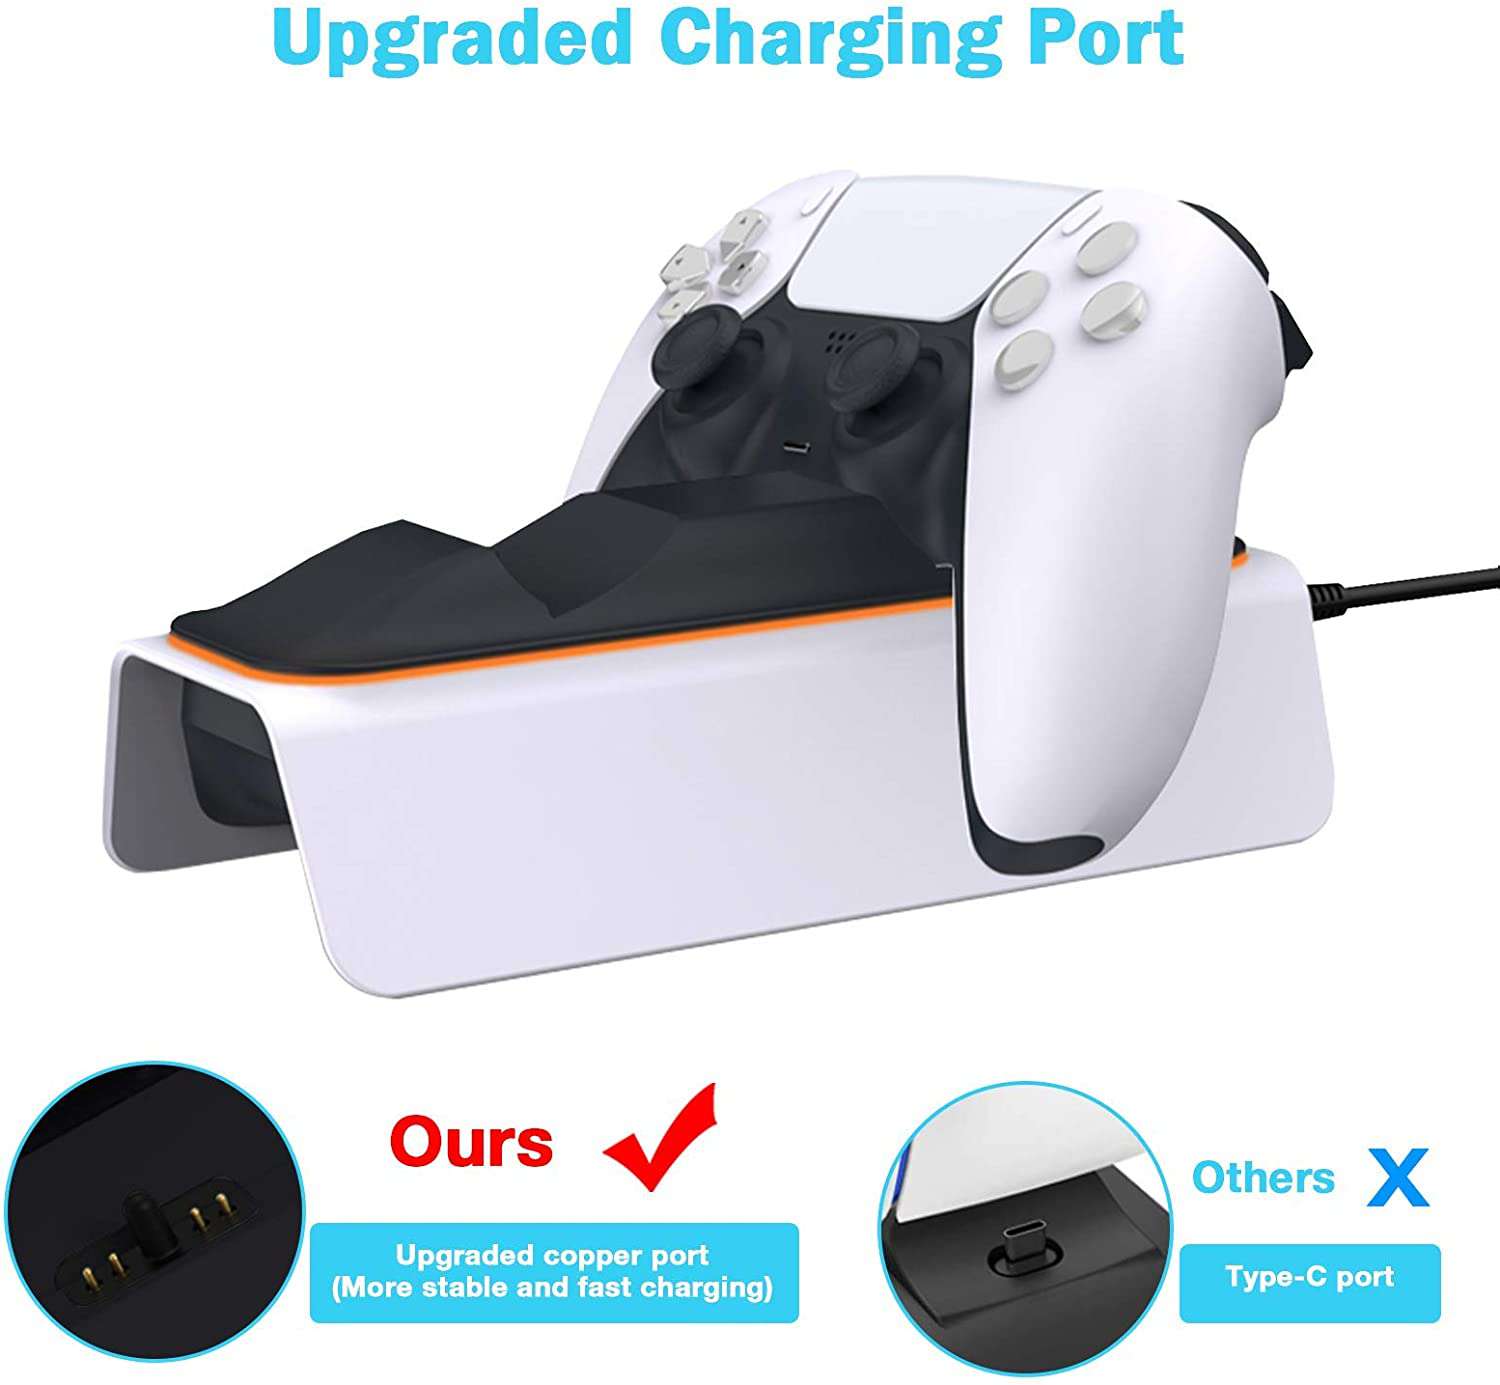 Charging station features an upgraded copper port for stable and fast charging, not a Type-C port.